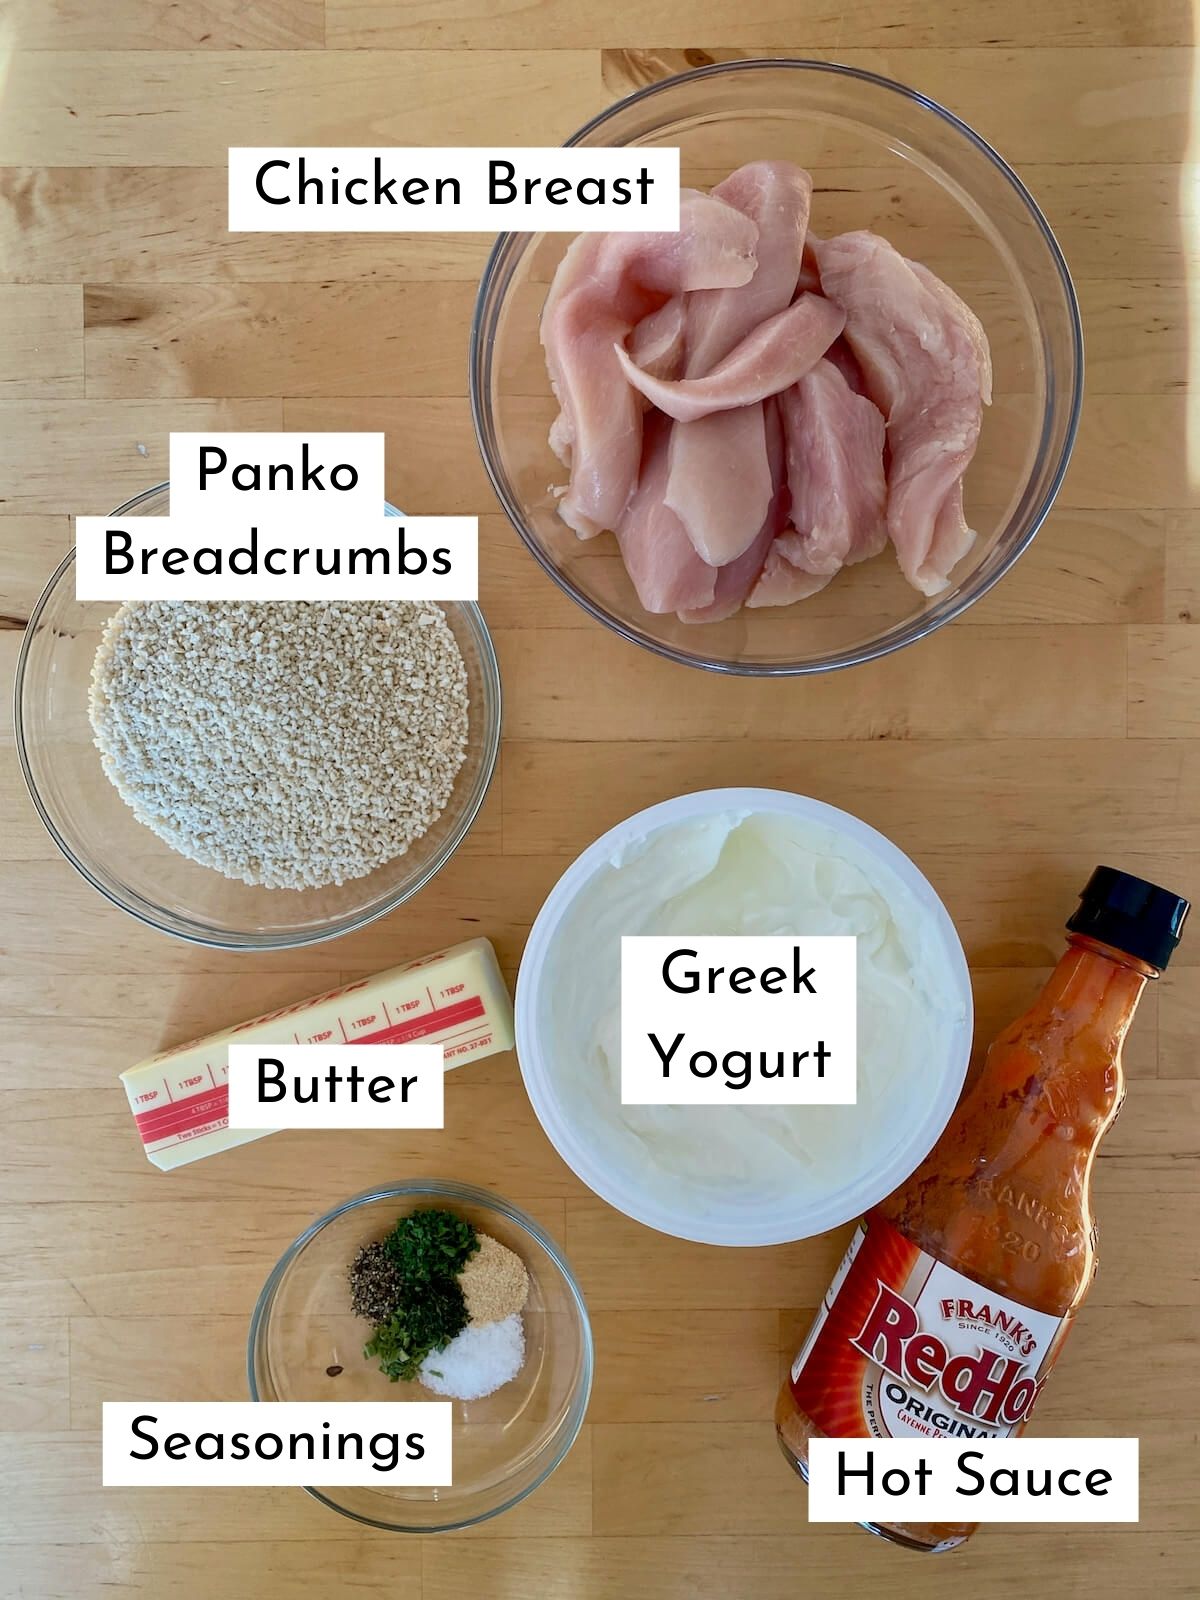 The ingredients to make air fryer buffalo chicken tenders. Each ingredient is labeled with text stating what it is. The ingredients include chicken breast, panko breadcrumbs, Greek yogurt, butter, seasonings, and hot sauce.